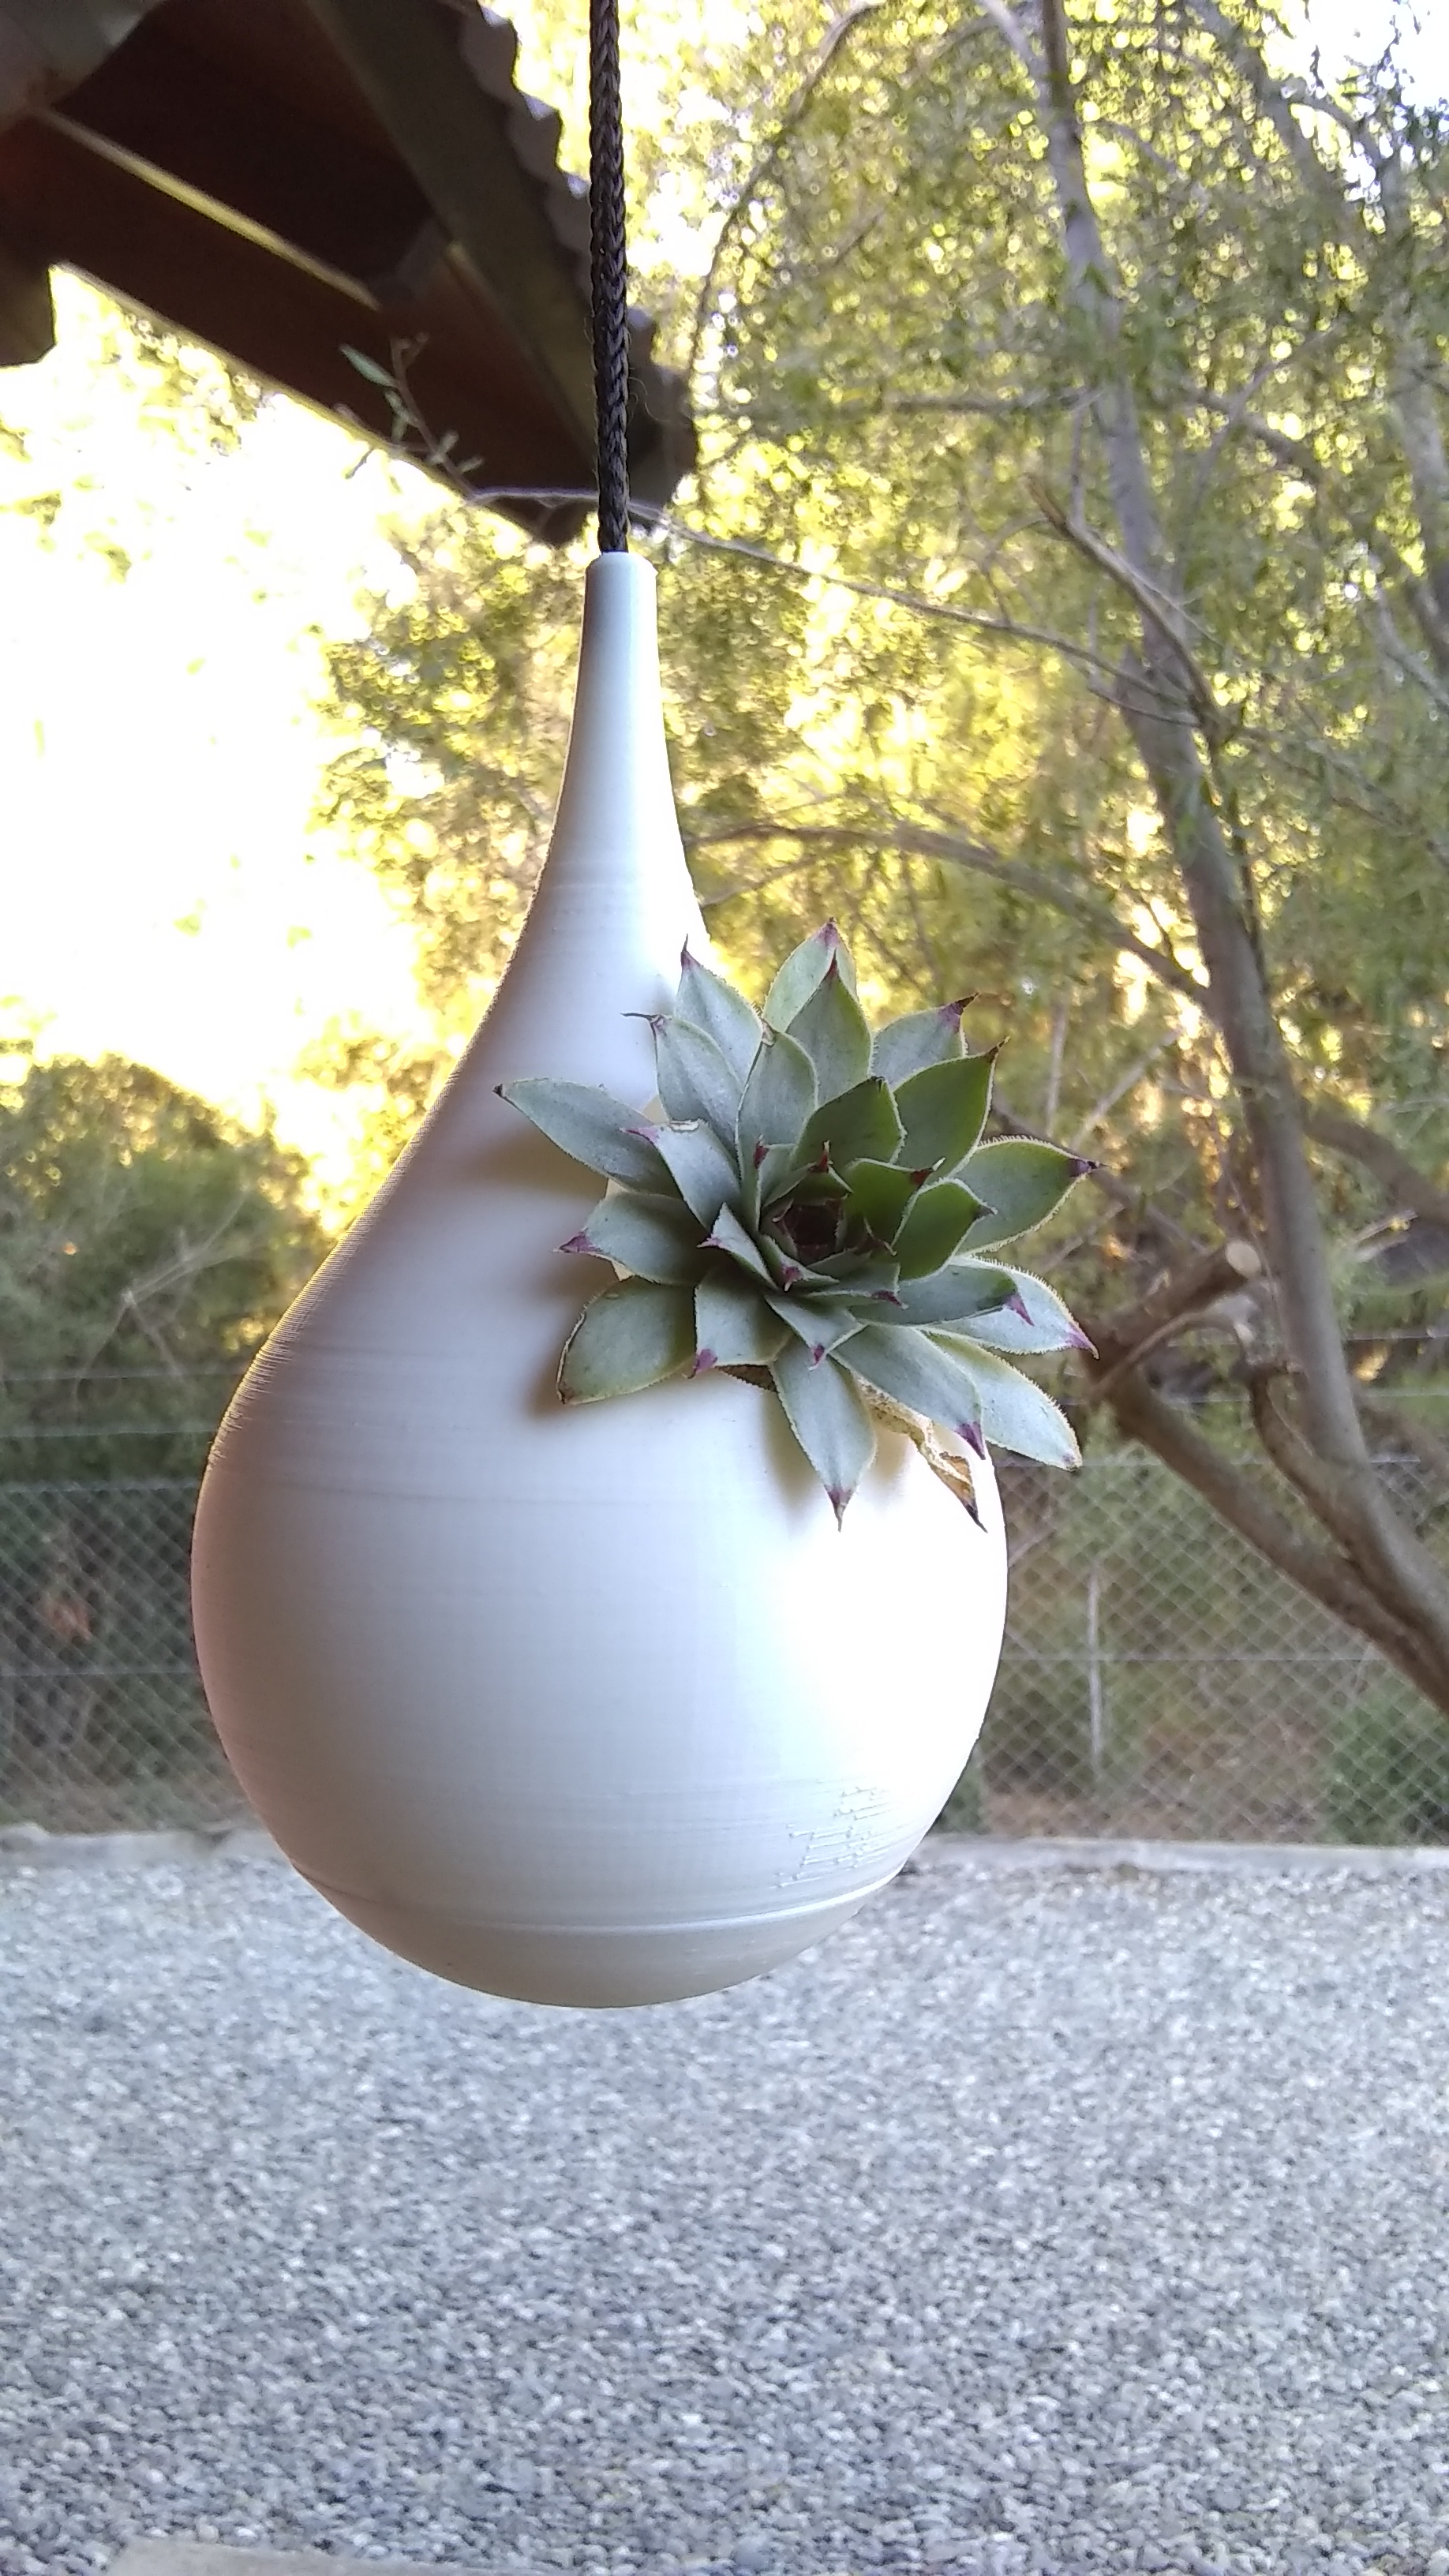 A one-of-a-kind hanging pot